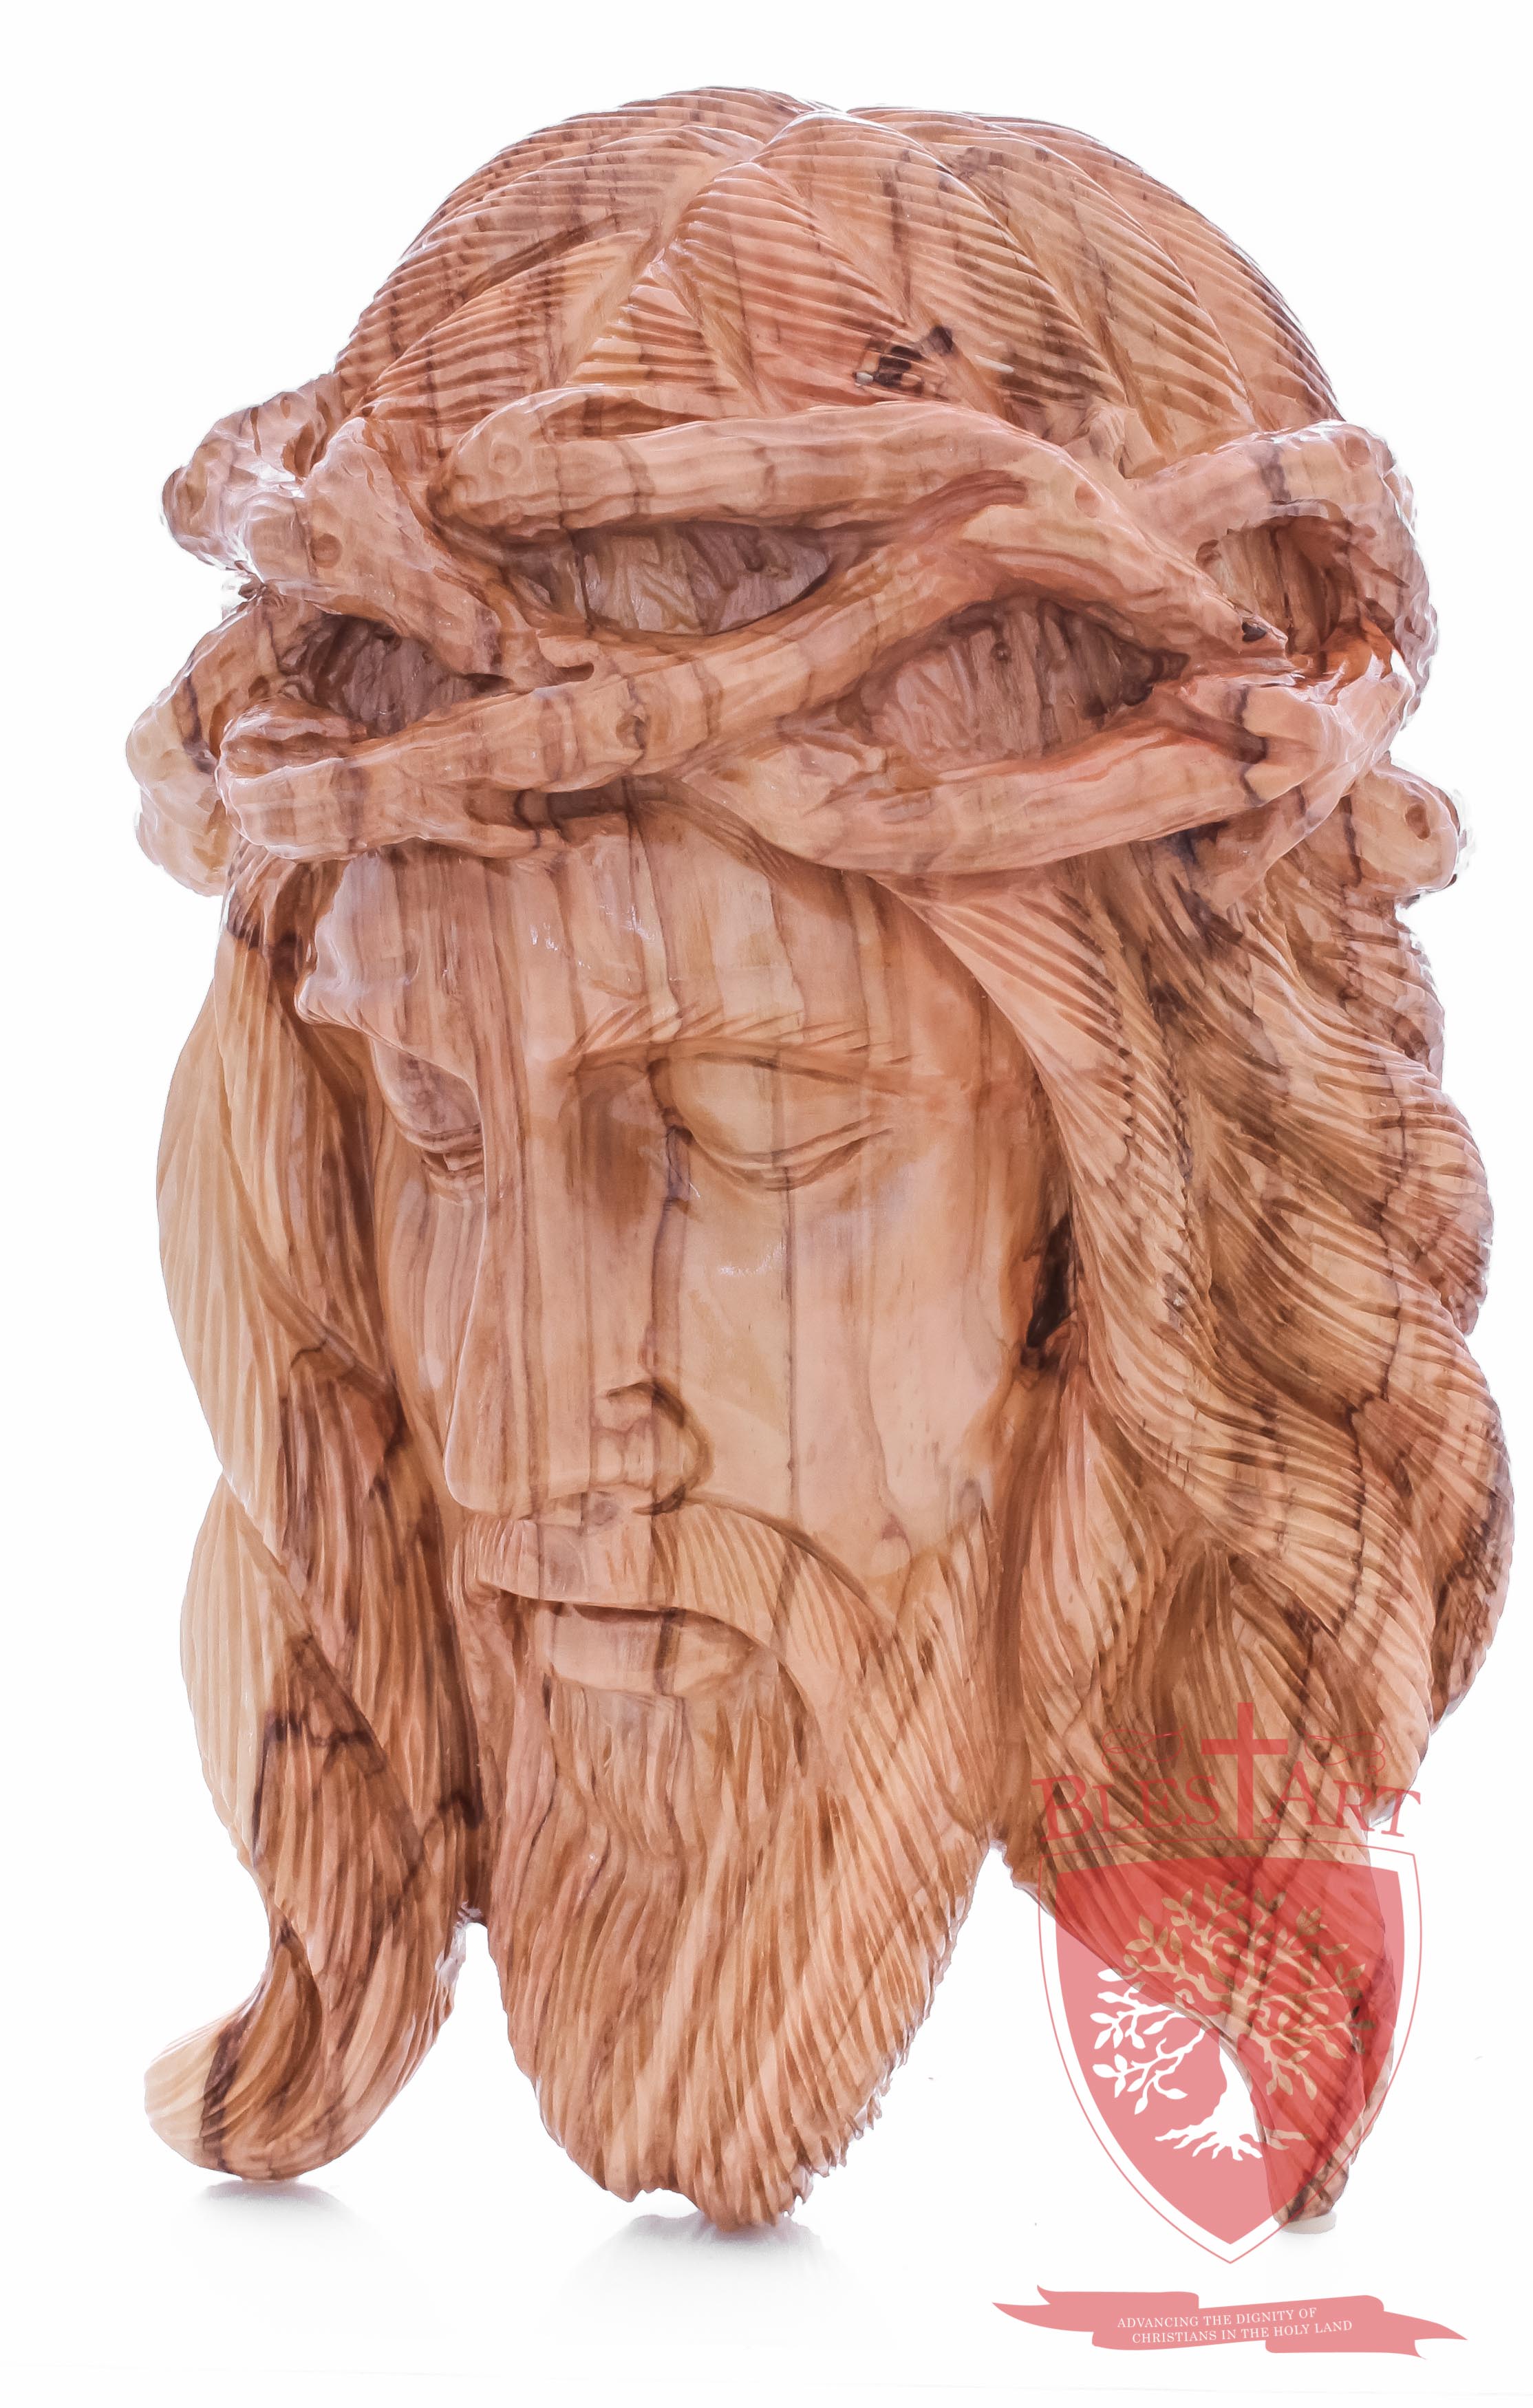 Bust of Jesus, Plaque. Two different sizes.